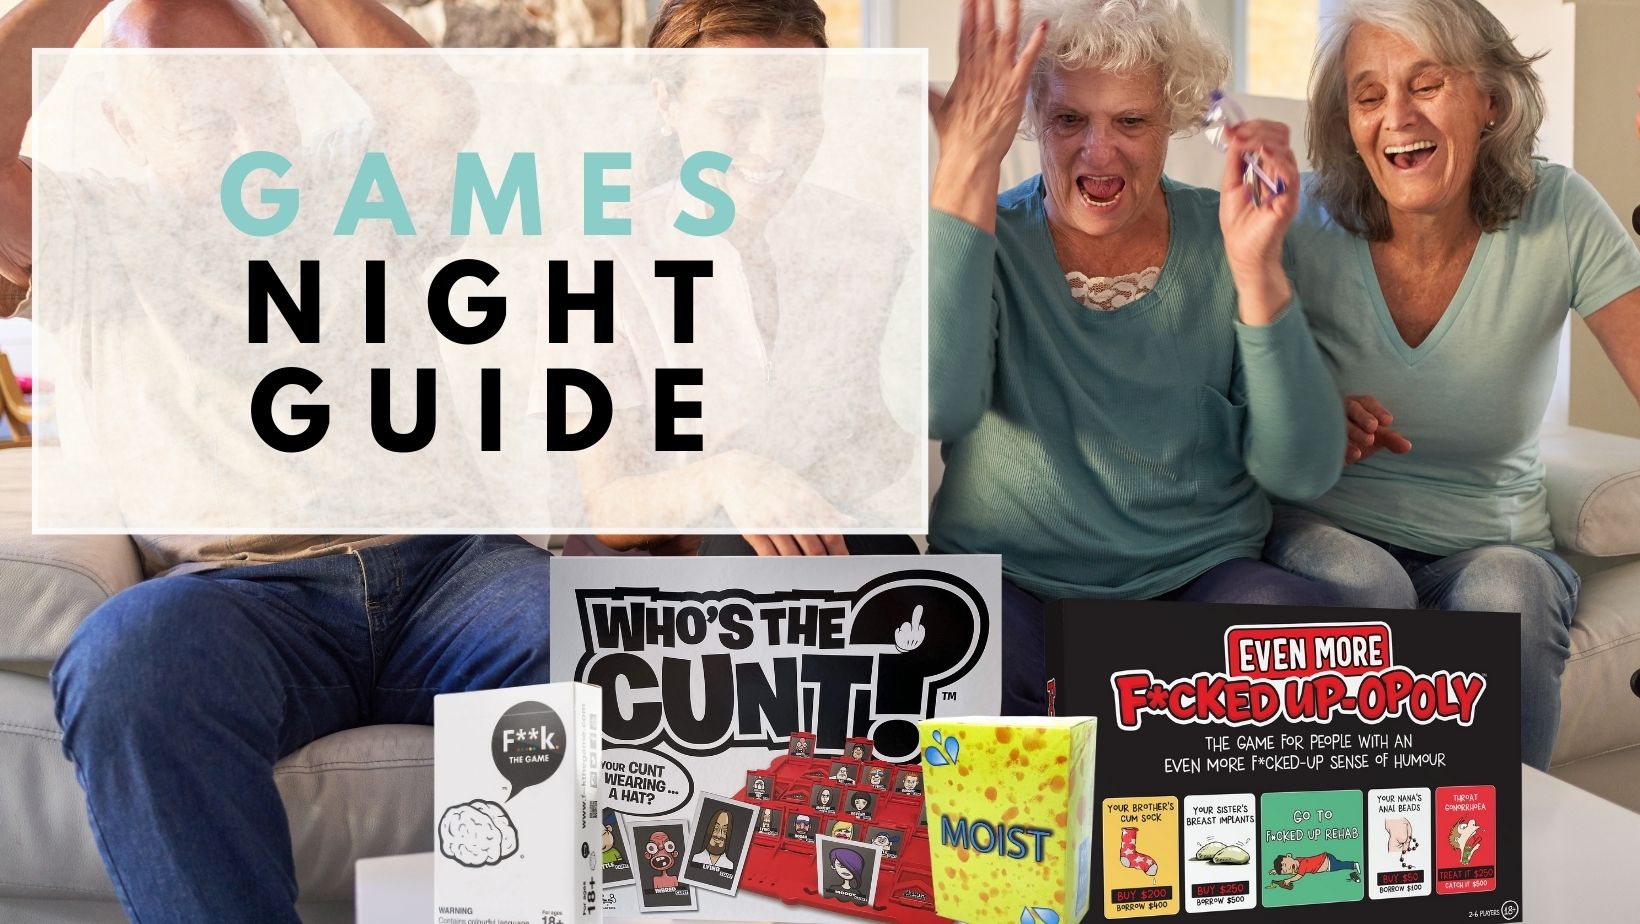 Couples' Games Night - Adult Board Games You Won't Find at Kmart!